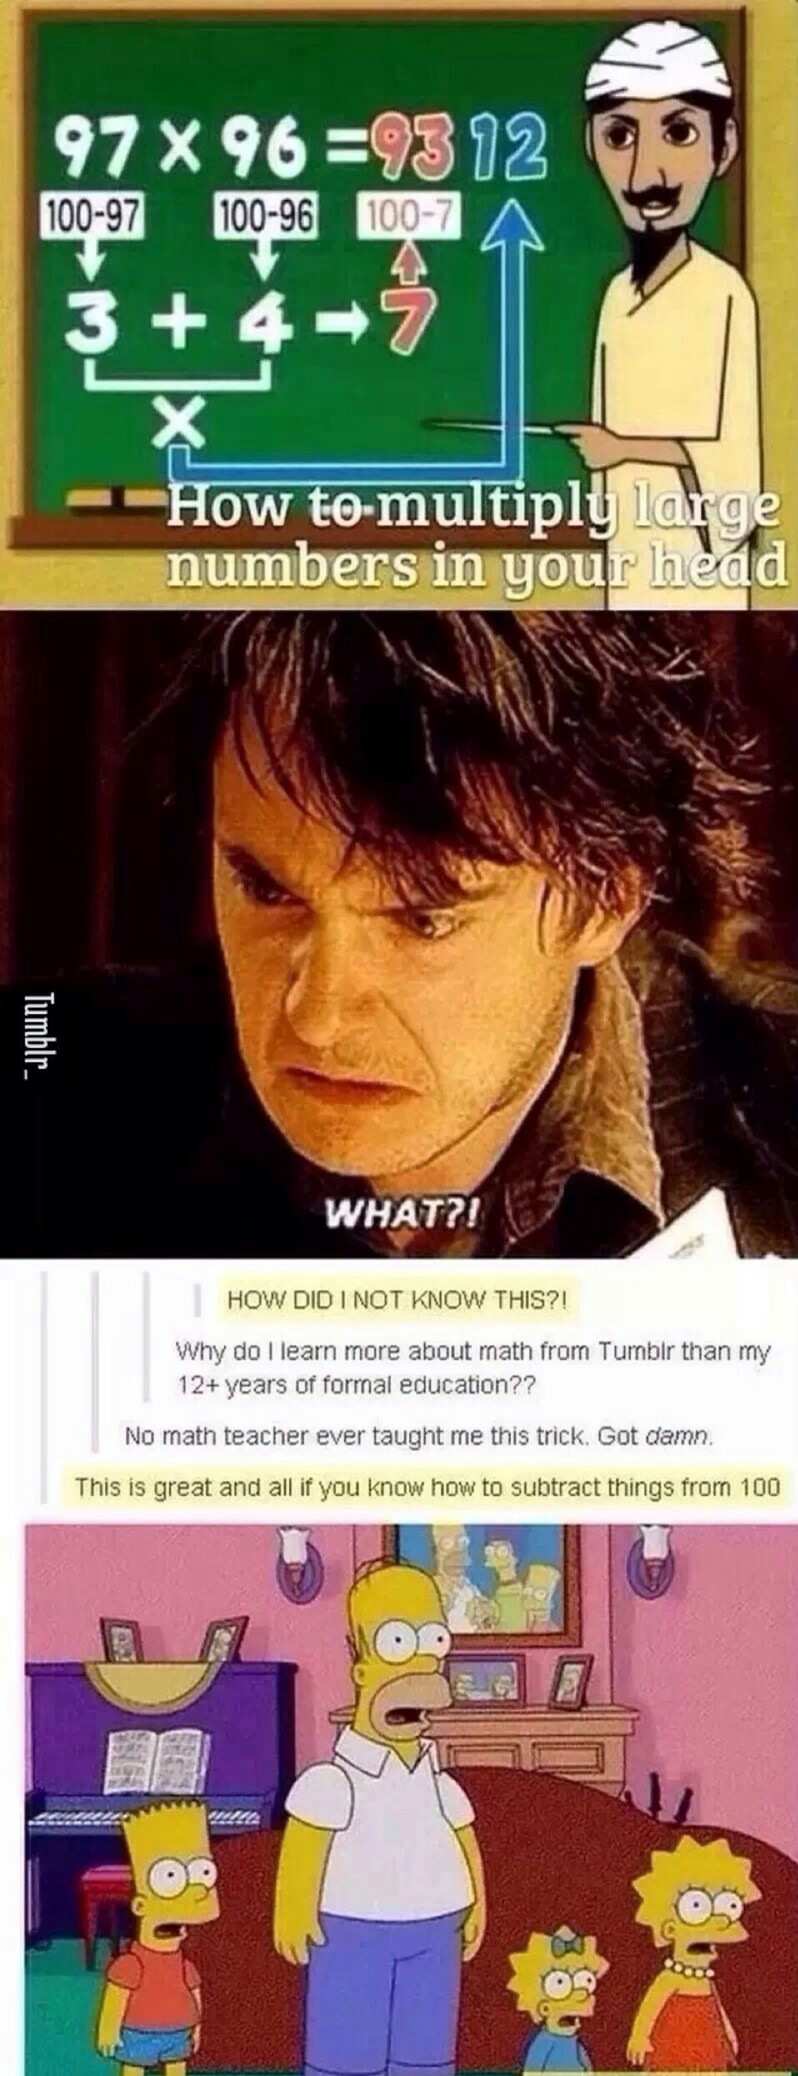 memes - Humour - 97 x 96 9312 10097 10096 1007 How tomultiply large numbers in your head Tumblr_ What?! How Did I Not Know This?! Why do I learn more about math from Tumblr than my 12 years of formal education?? No math teacher ever taught me this trick. 